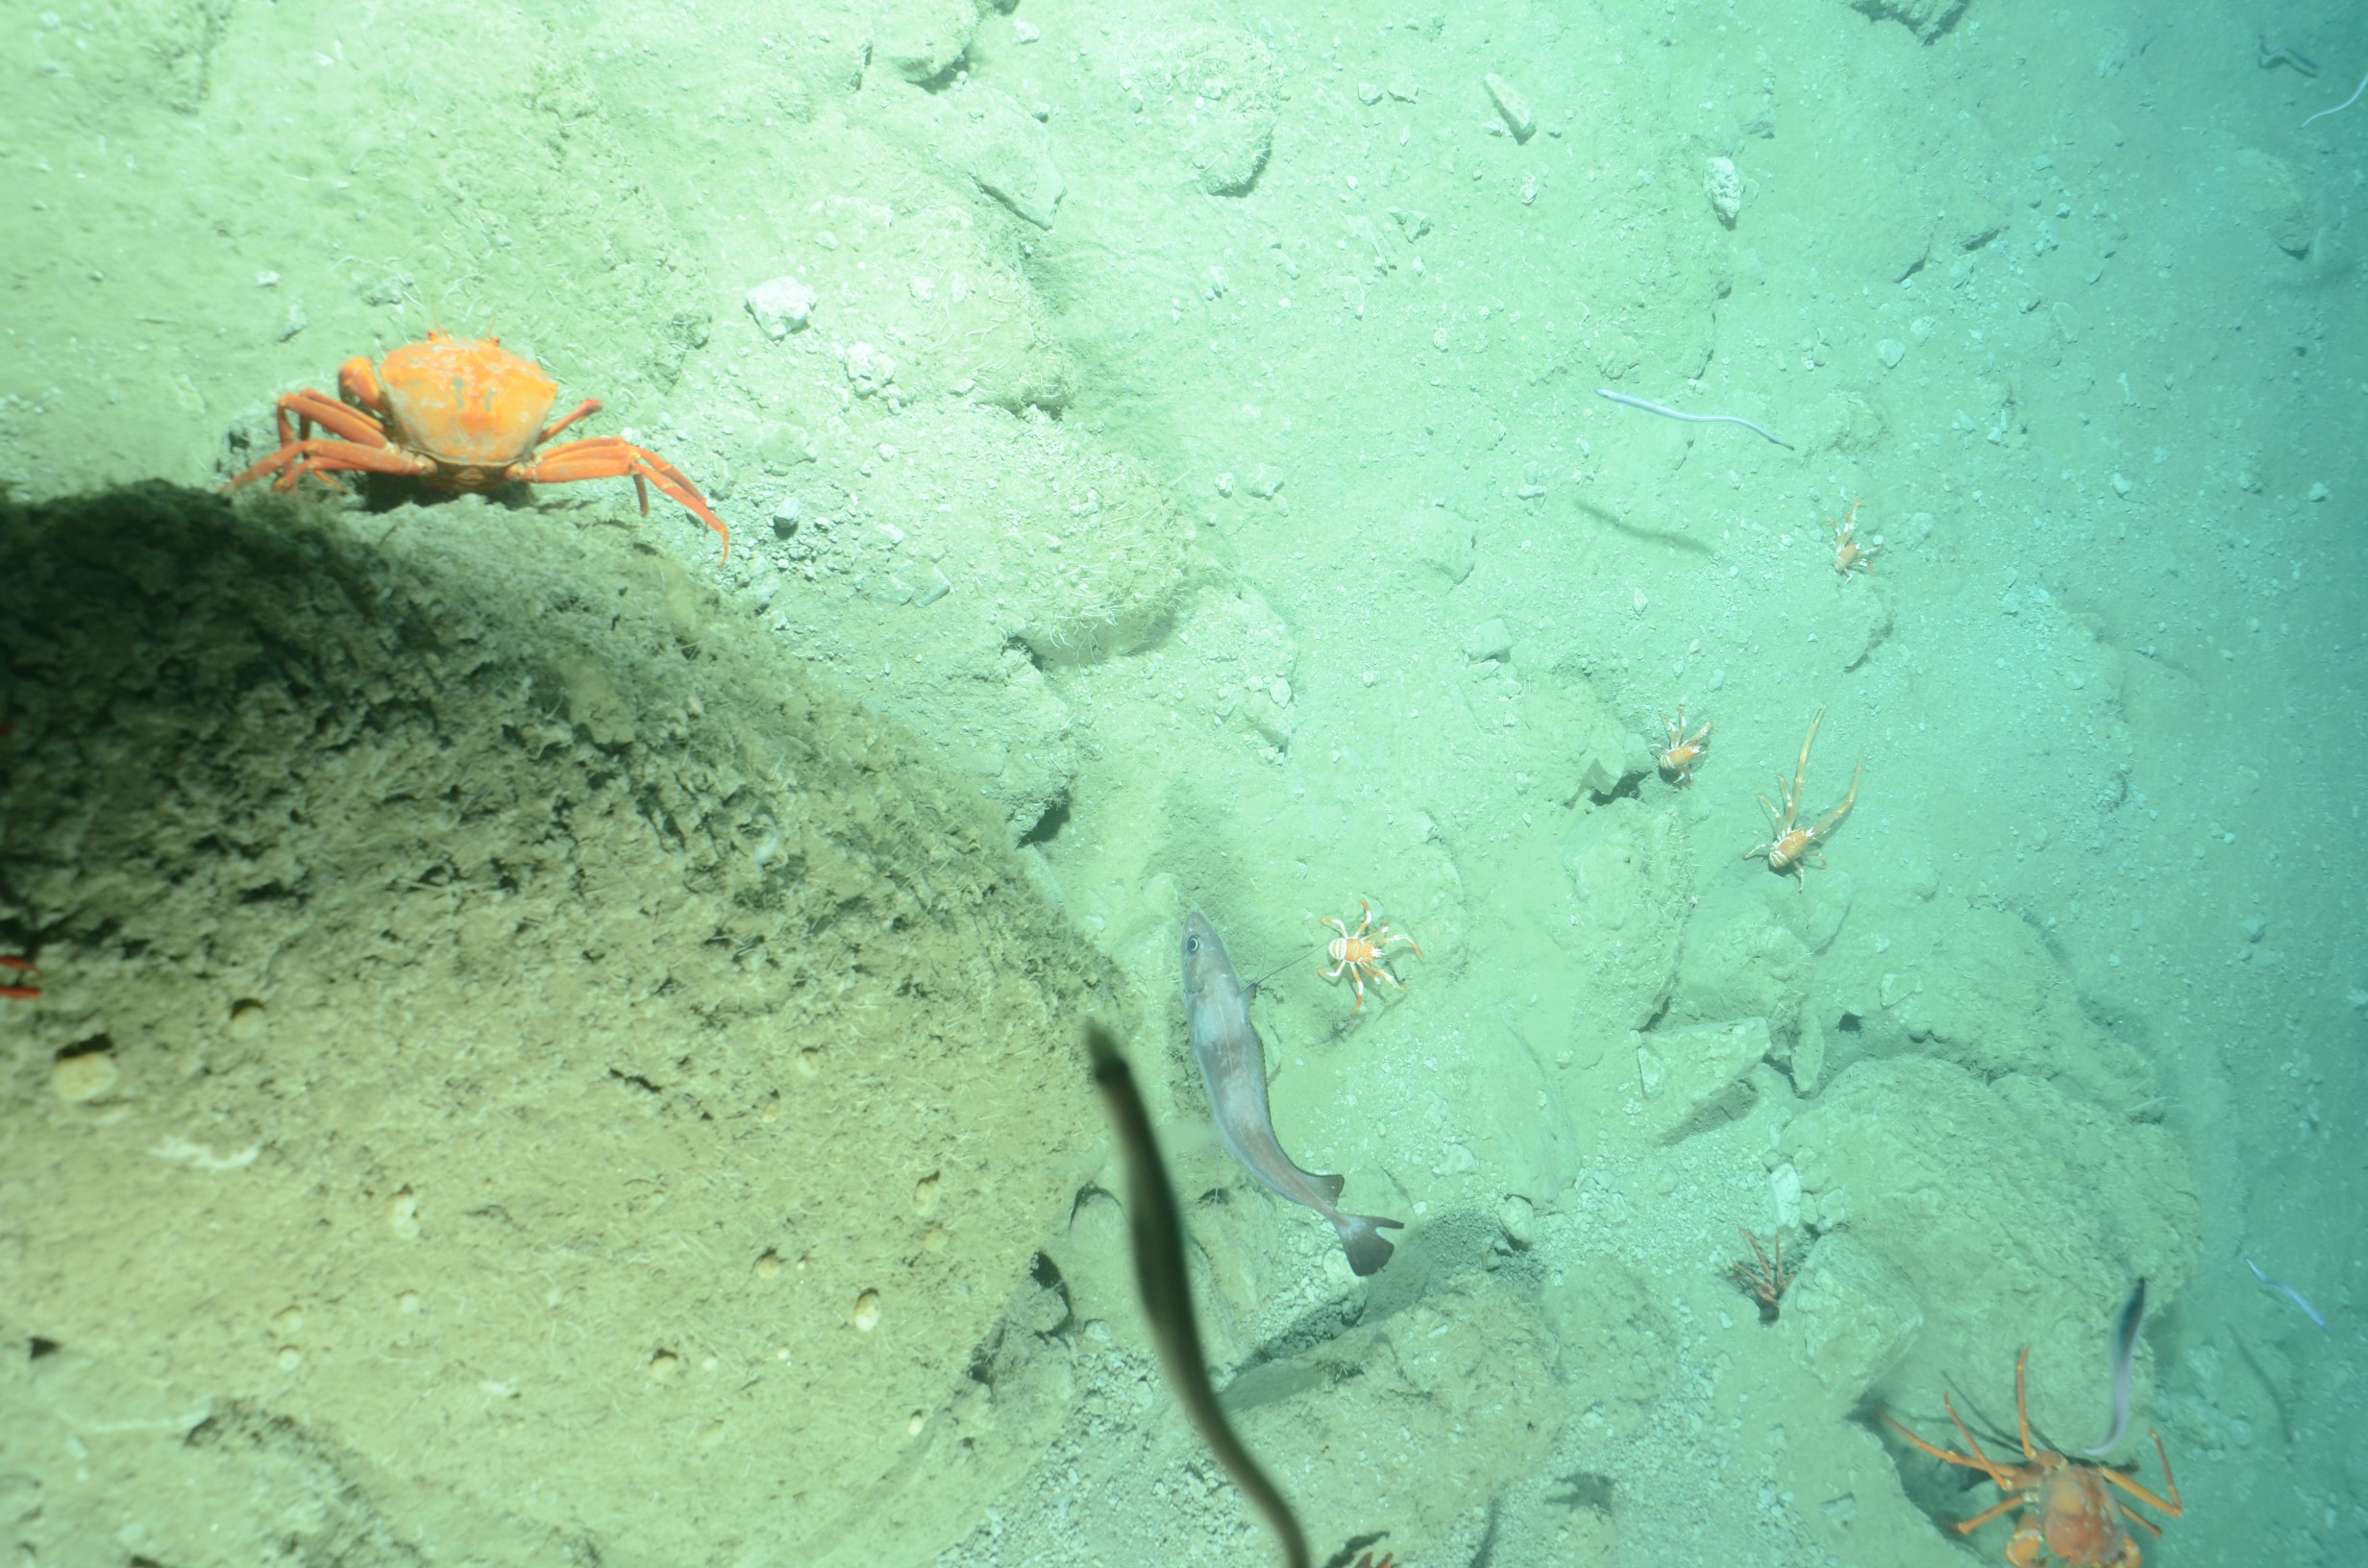 Areas of higher relief in the Washington Canyon with galatheid crabs, eels and red crabs